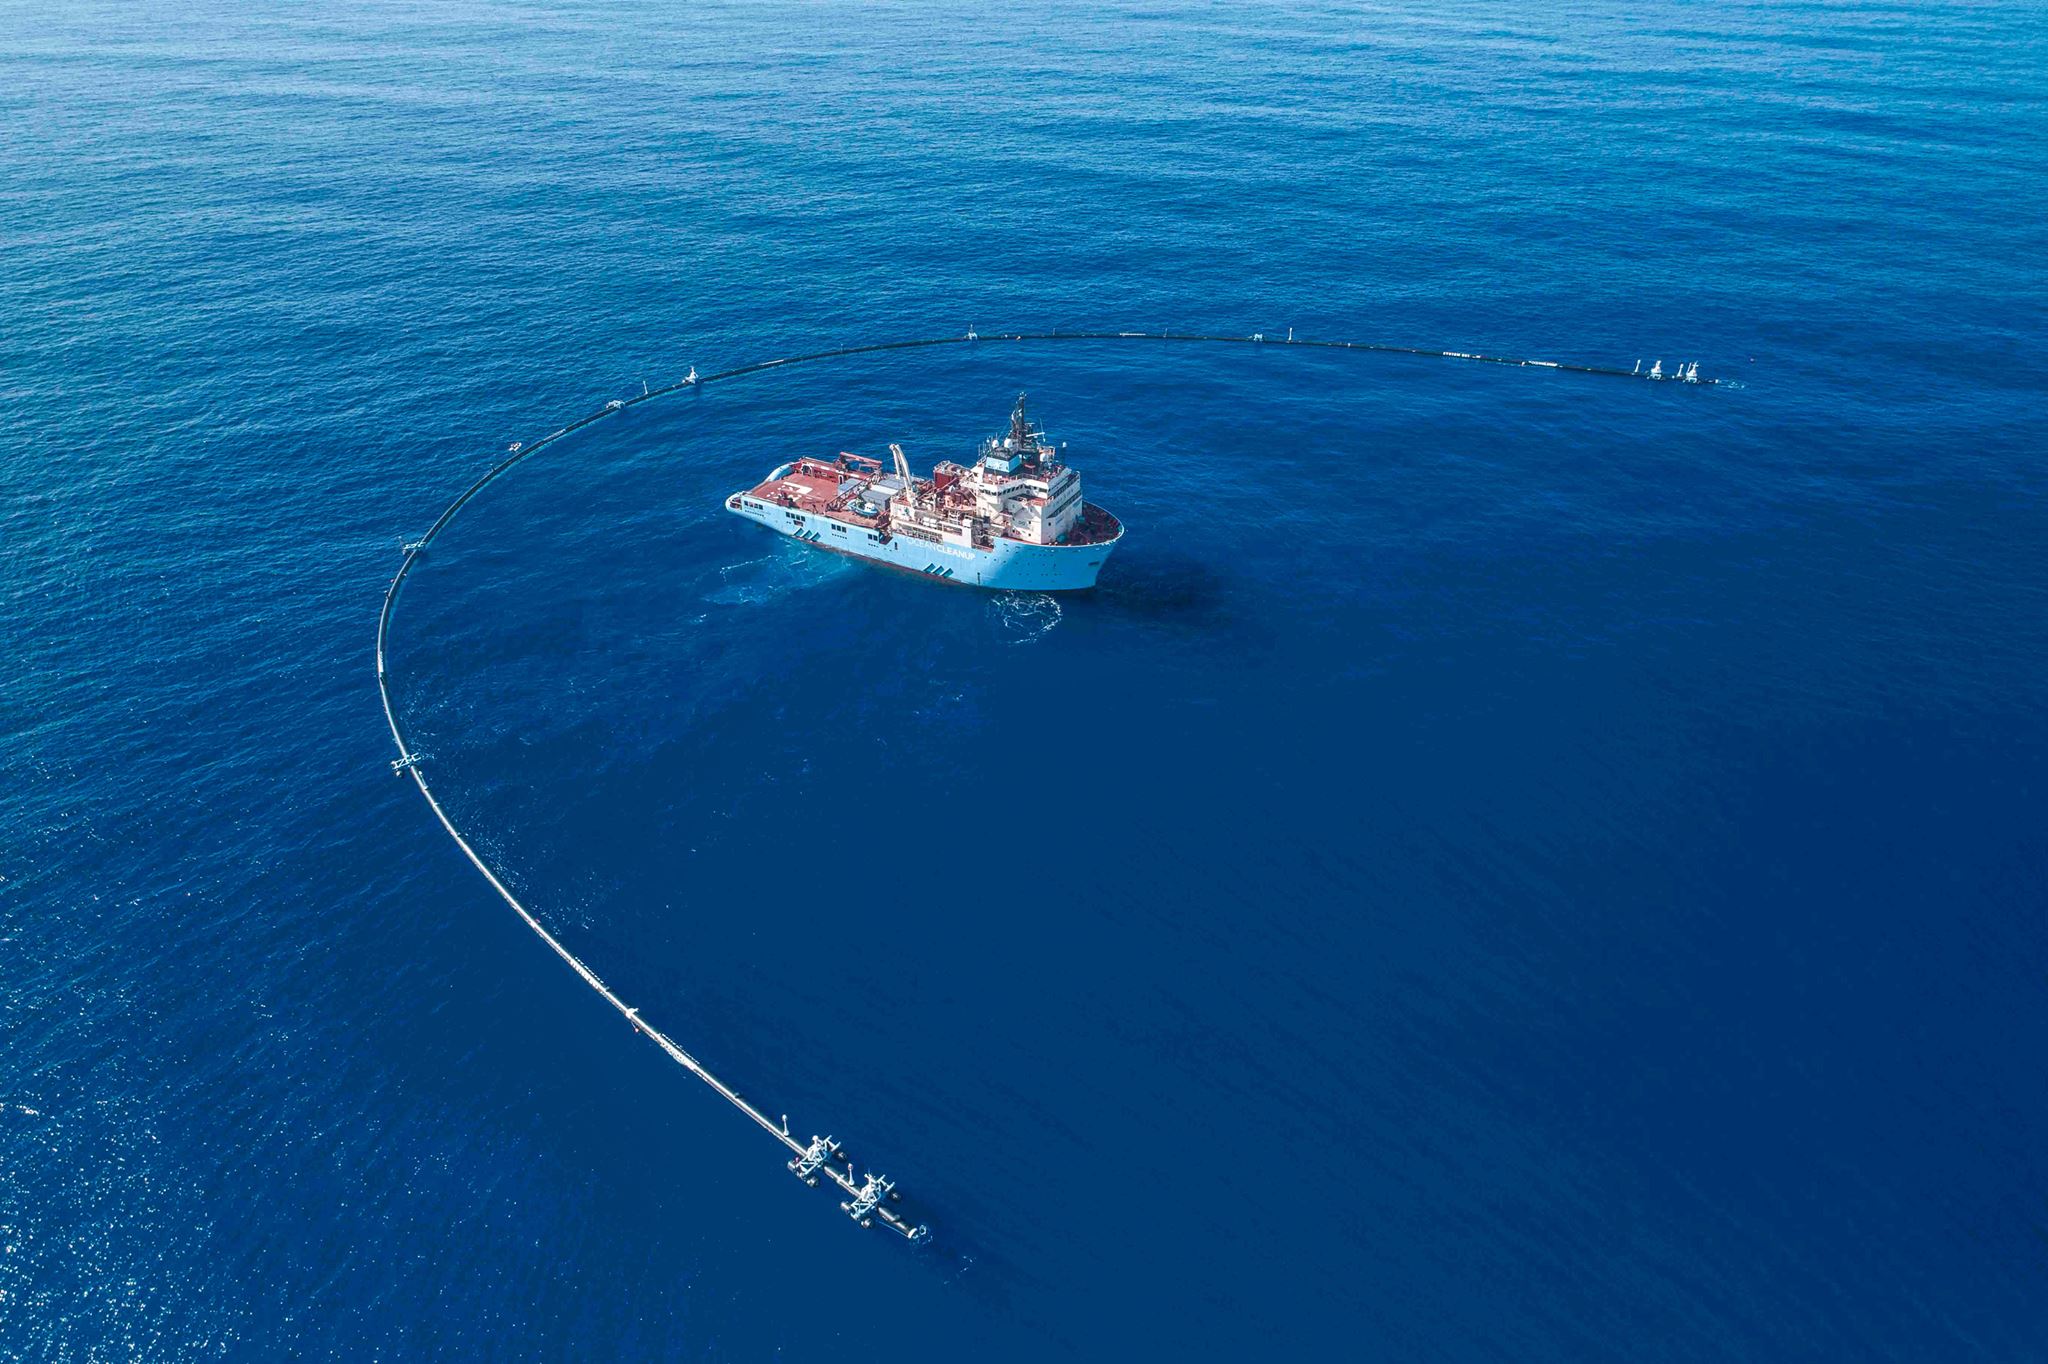 After Successful Trials, Maersk Launcher Towing First Ocean Cleanup System to Great Pacific Garbage Patch